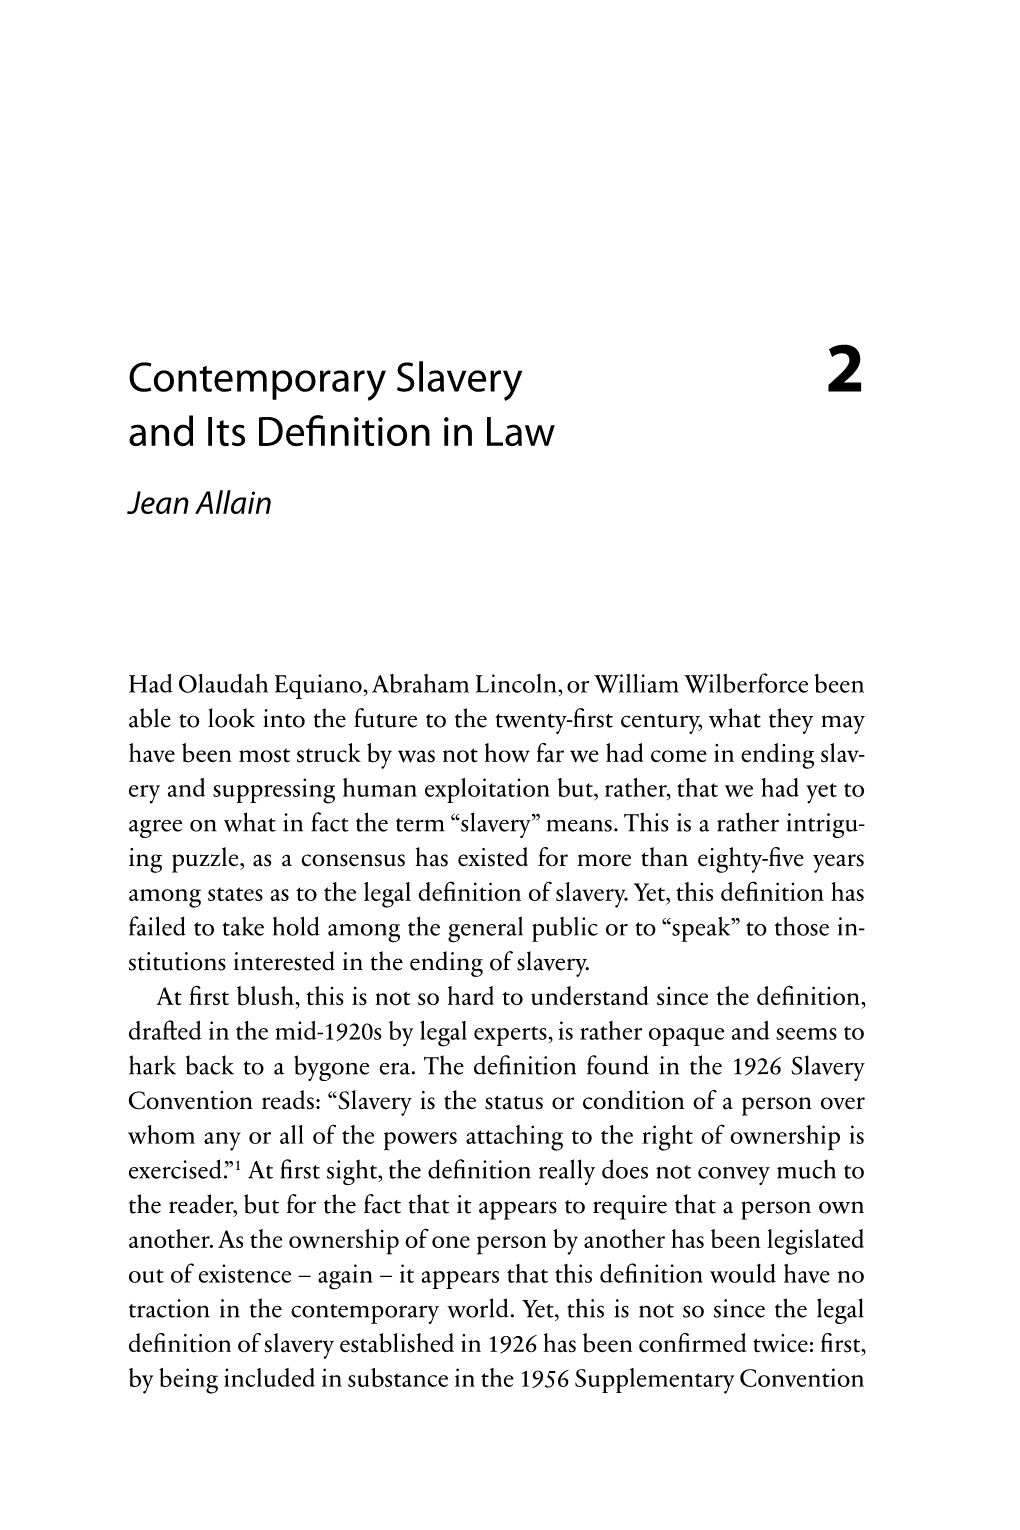 Contemporary Slavery and Its Definition In